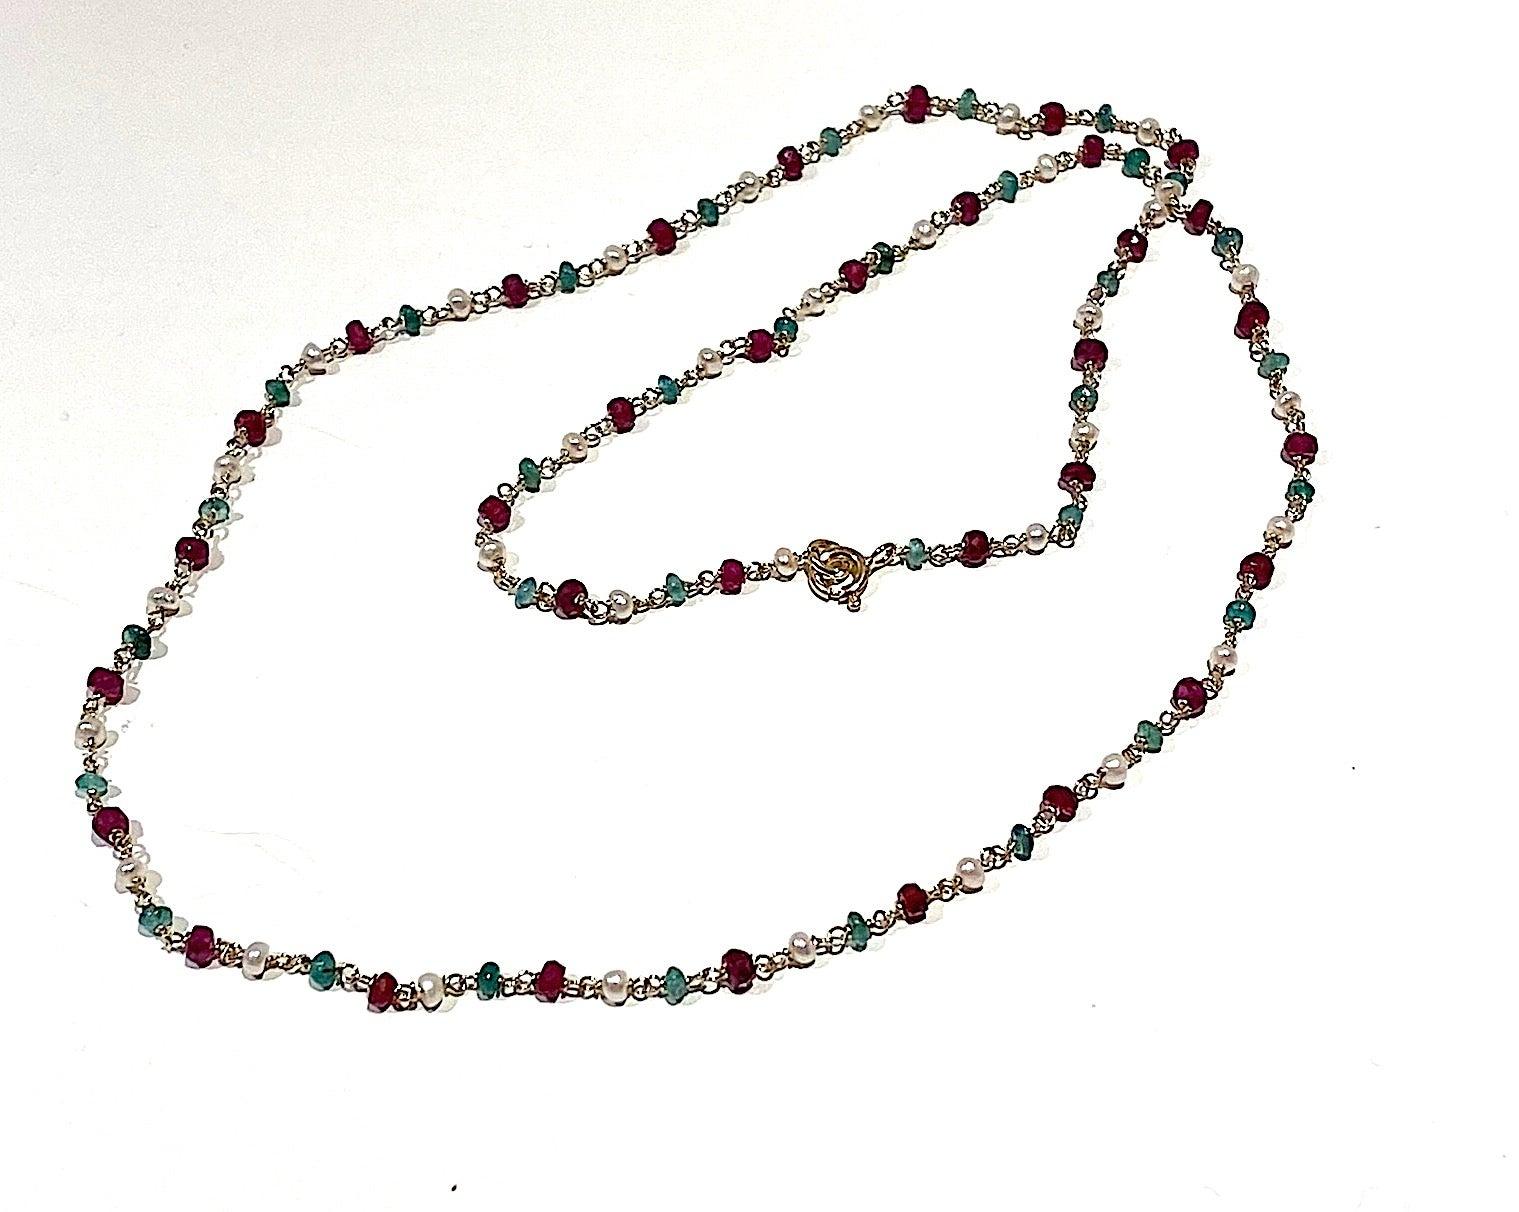 Handcrafted Ugolini 3 Karat Emeralds 18 Karat Yellow Gold Garnets Beaded Necklace
Here there is an amazing 18 karats yellow gold necklace adorned with 3 karat deep green emerald, red garnets and fresh water pearls. Every 3 beads there's a chain.
The